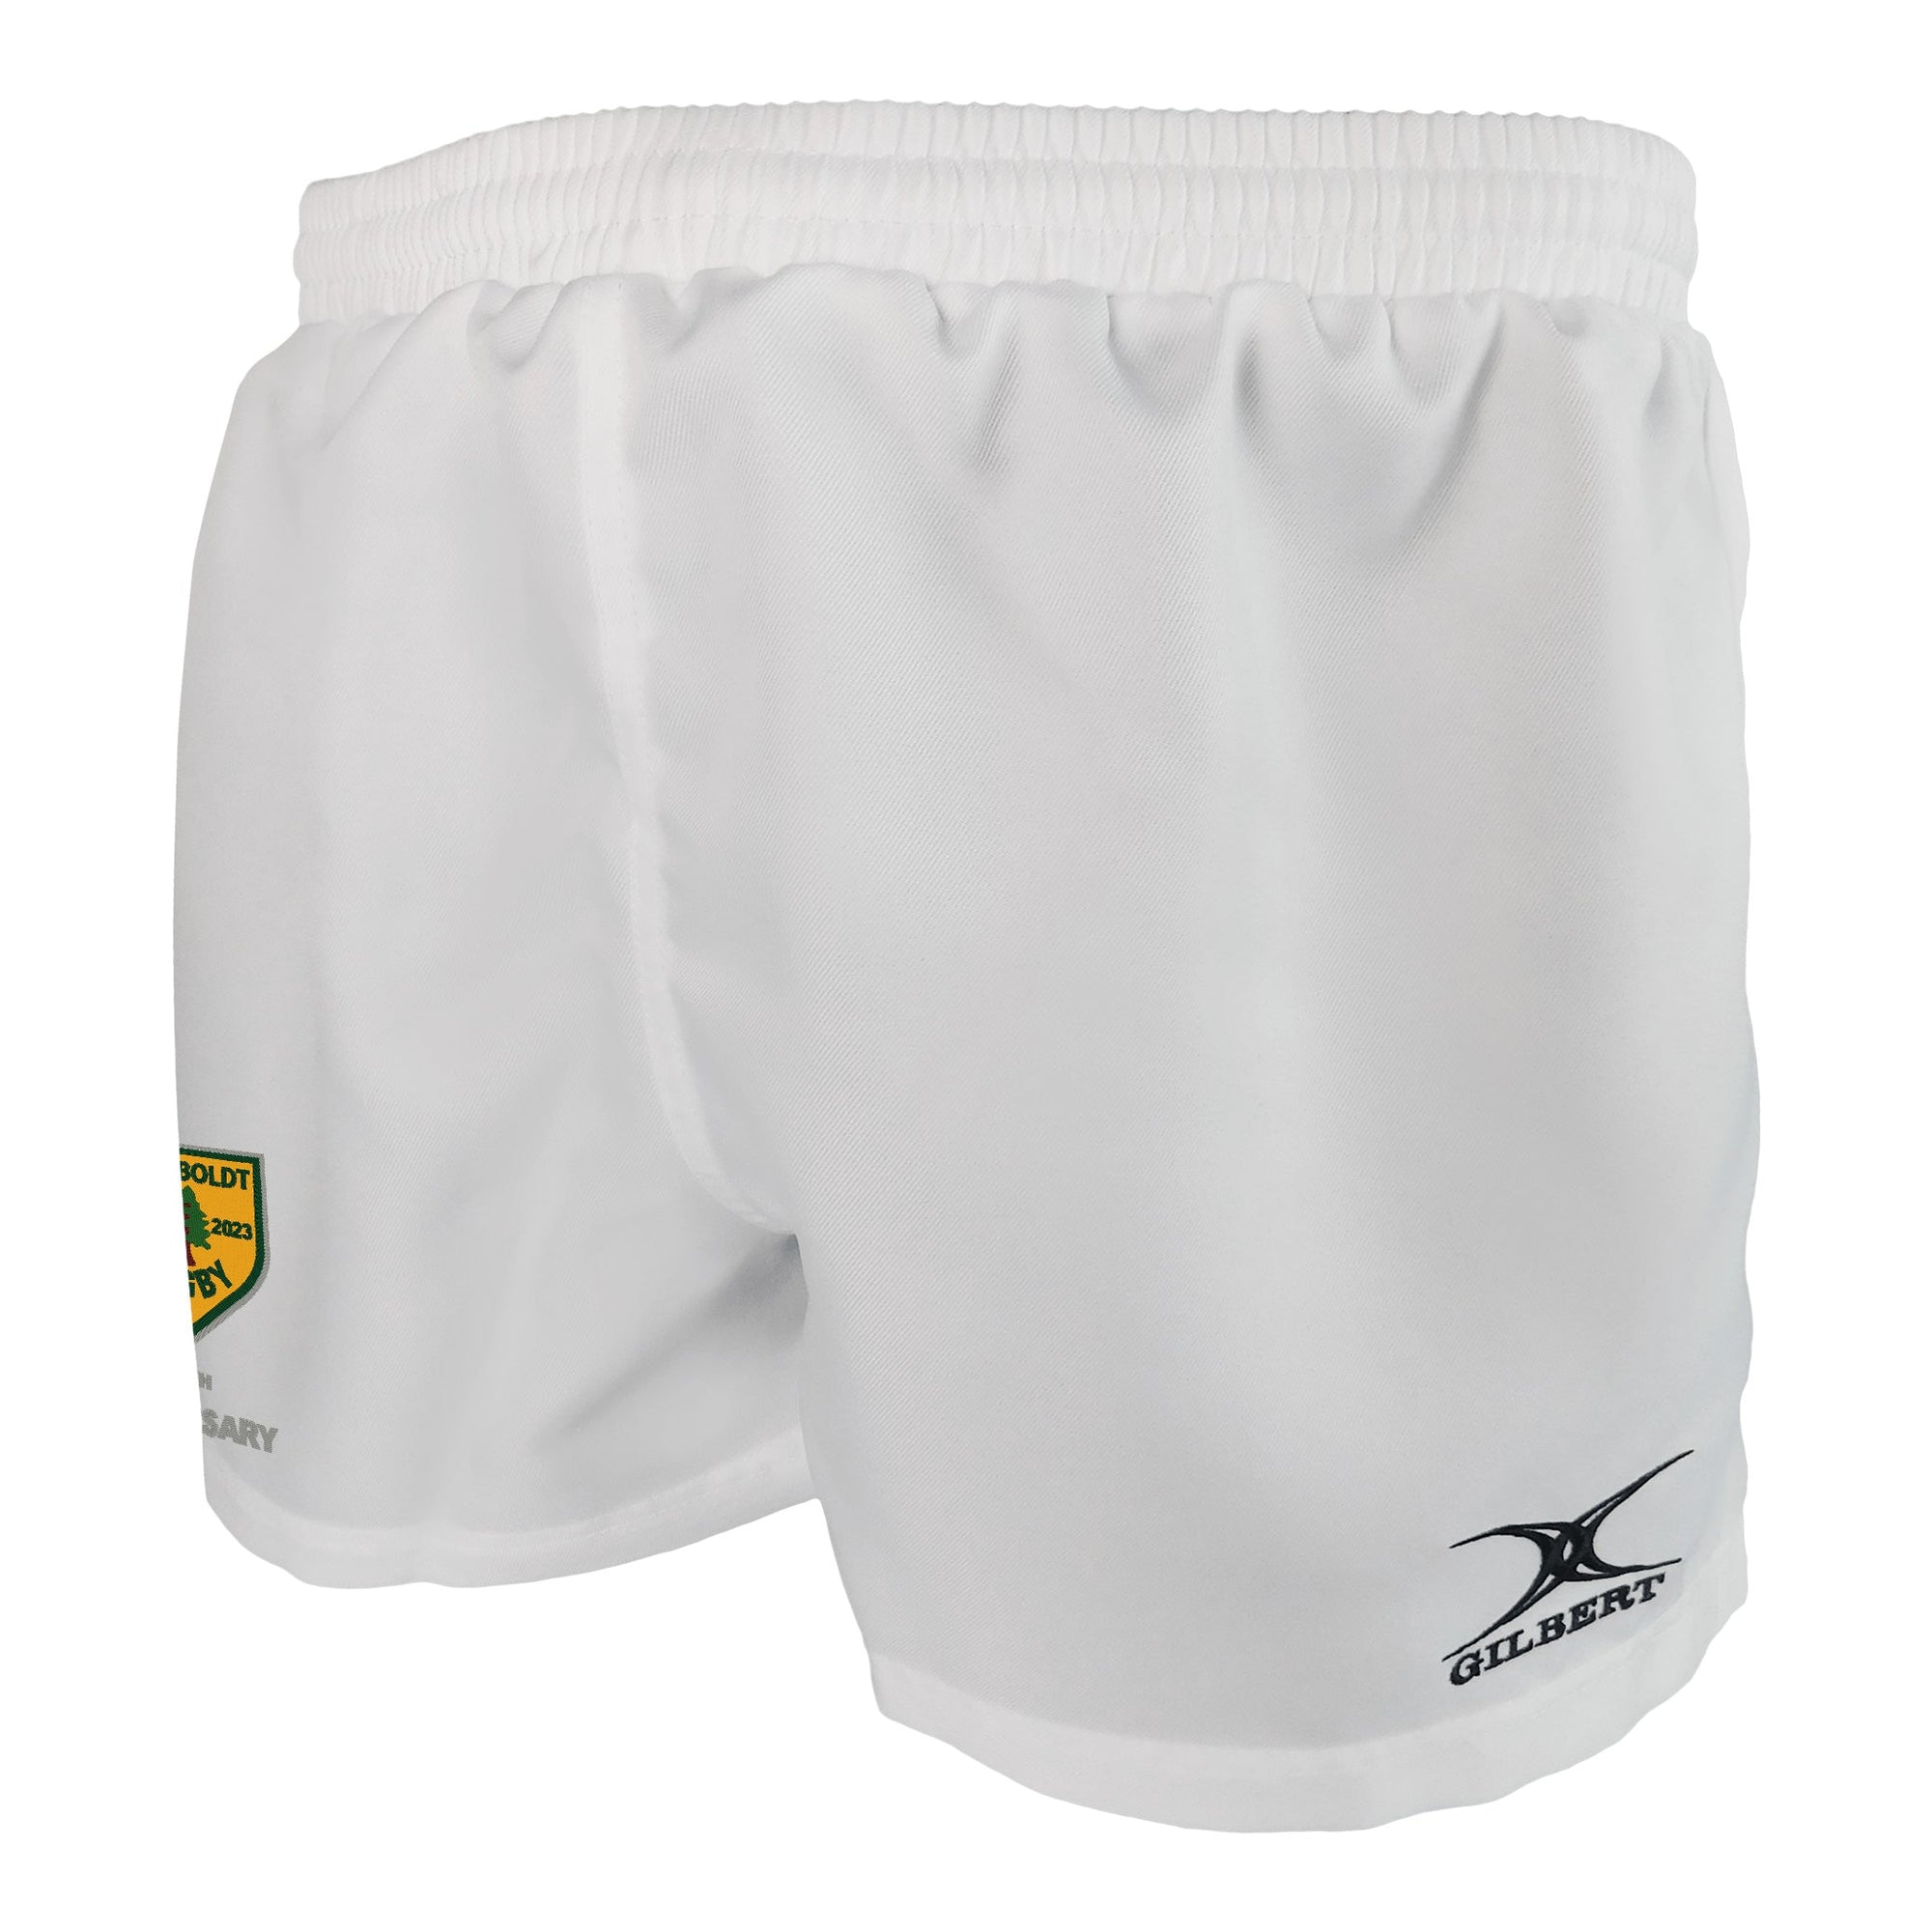 Rugby Imports Humboldt Rugby 50th Anniv. Saracen Rugby Shorts